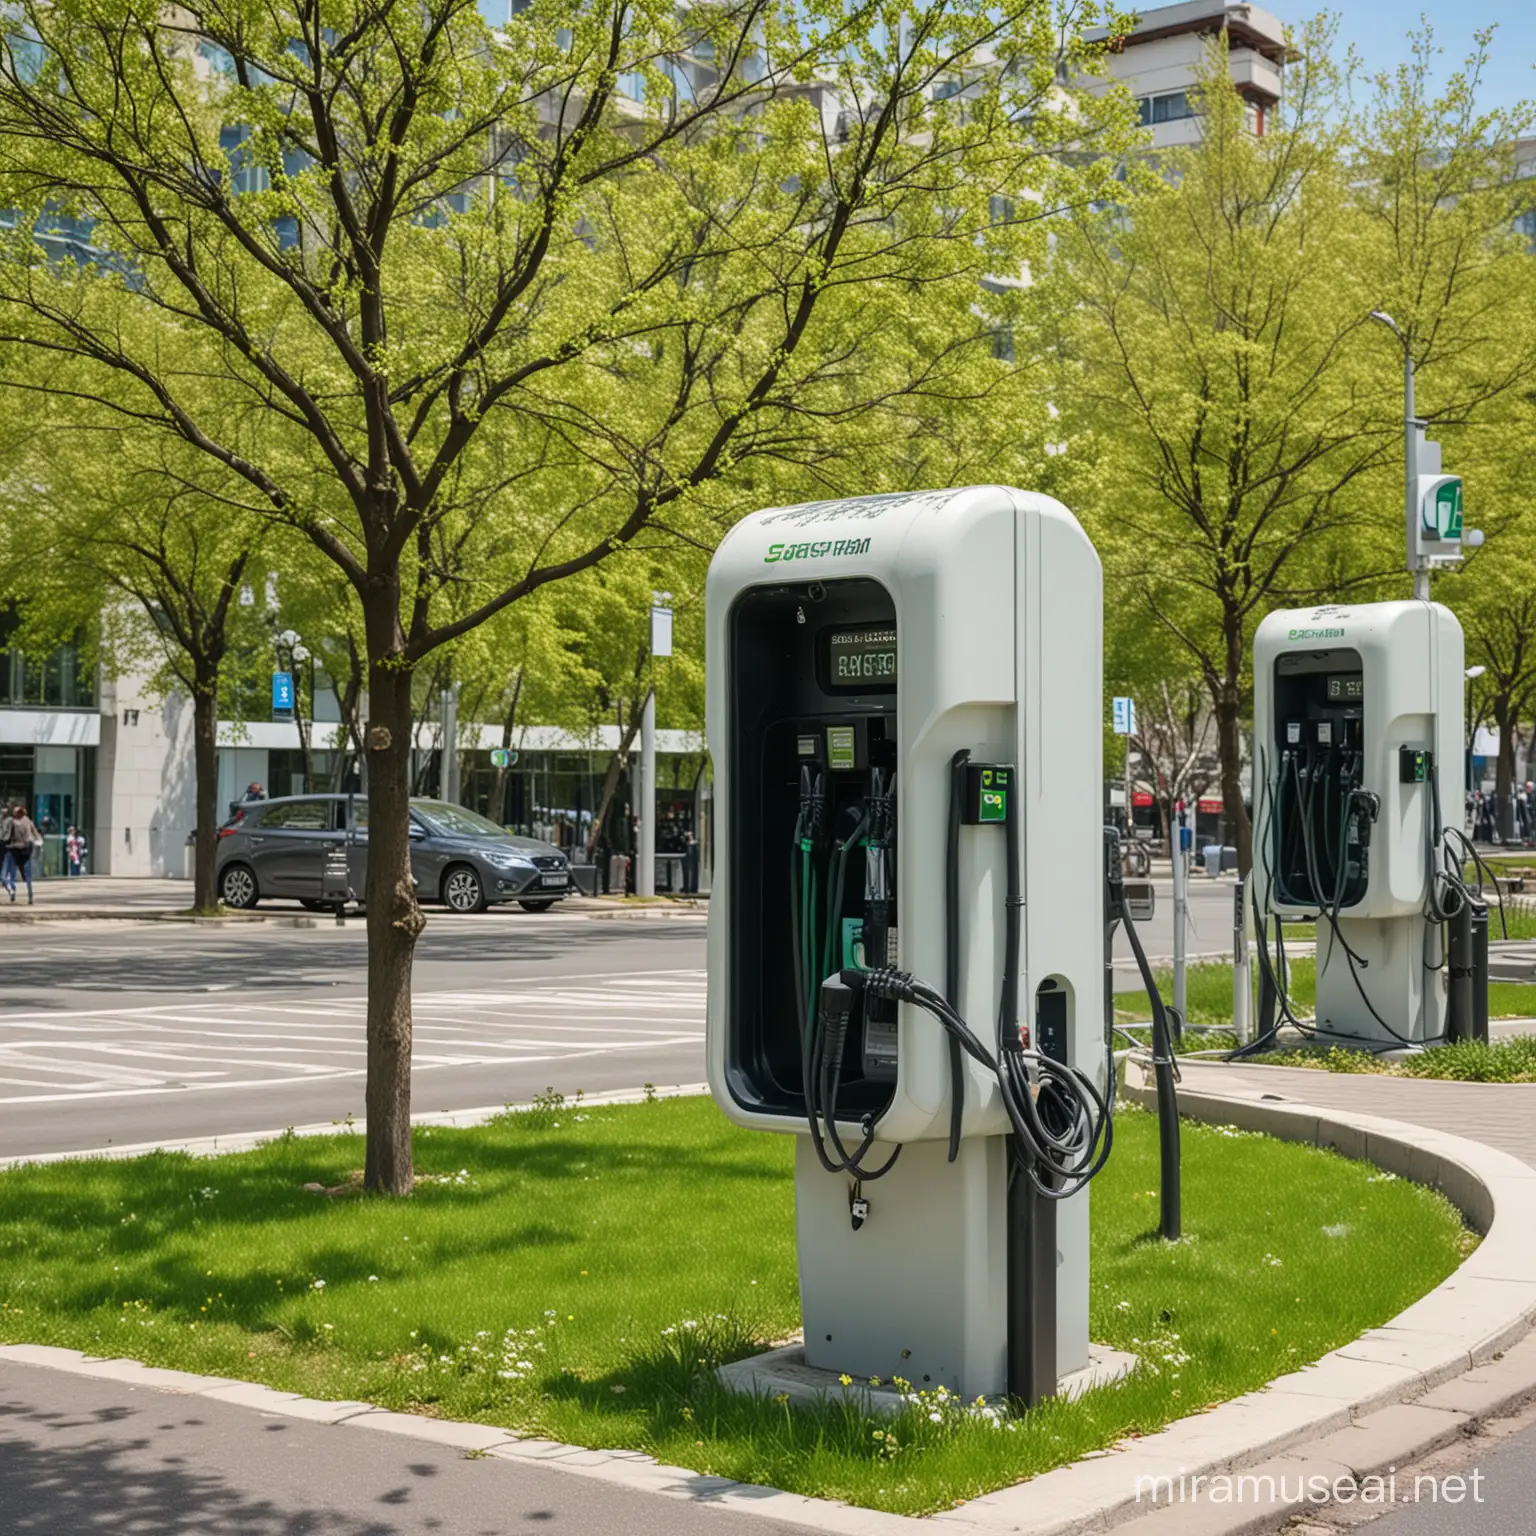 A beautiful spring day in Sofia Bulgaria. Close up of Alpitronic hypercharger hyc 150 charging stations in the parking lot. Green blooming spring trees around the parking lot. A green park behind and a large shopping mall in the distance far behind.